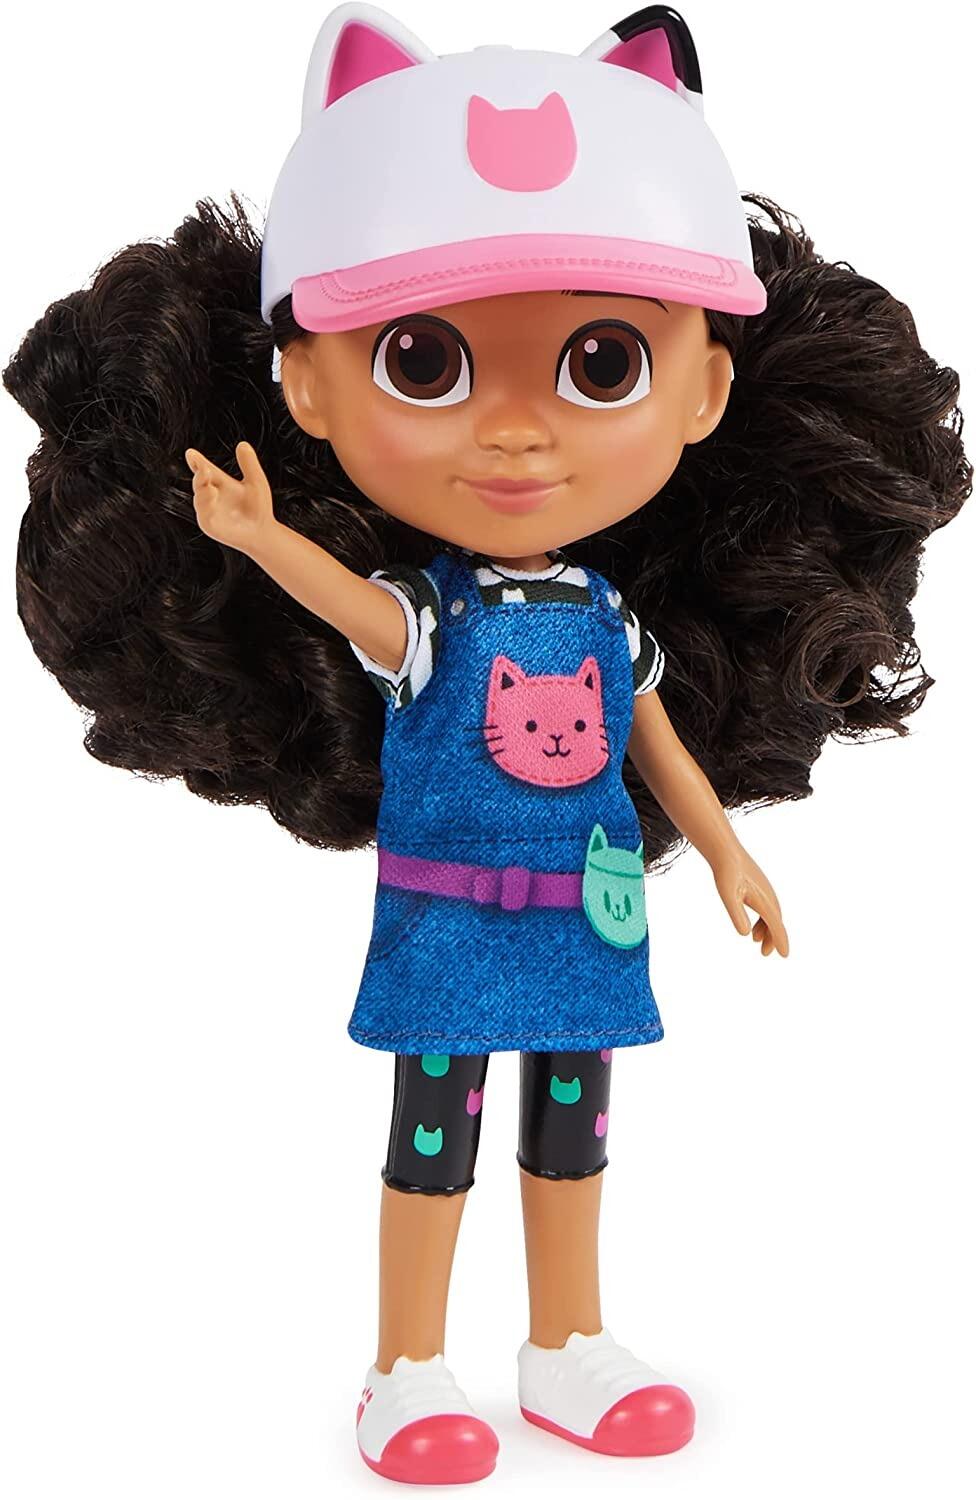 Gabby's Dollhouse, 8-inch Gabby Girl Doll (Travel Edition) with Accessories